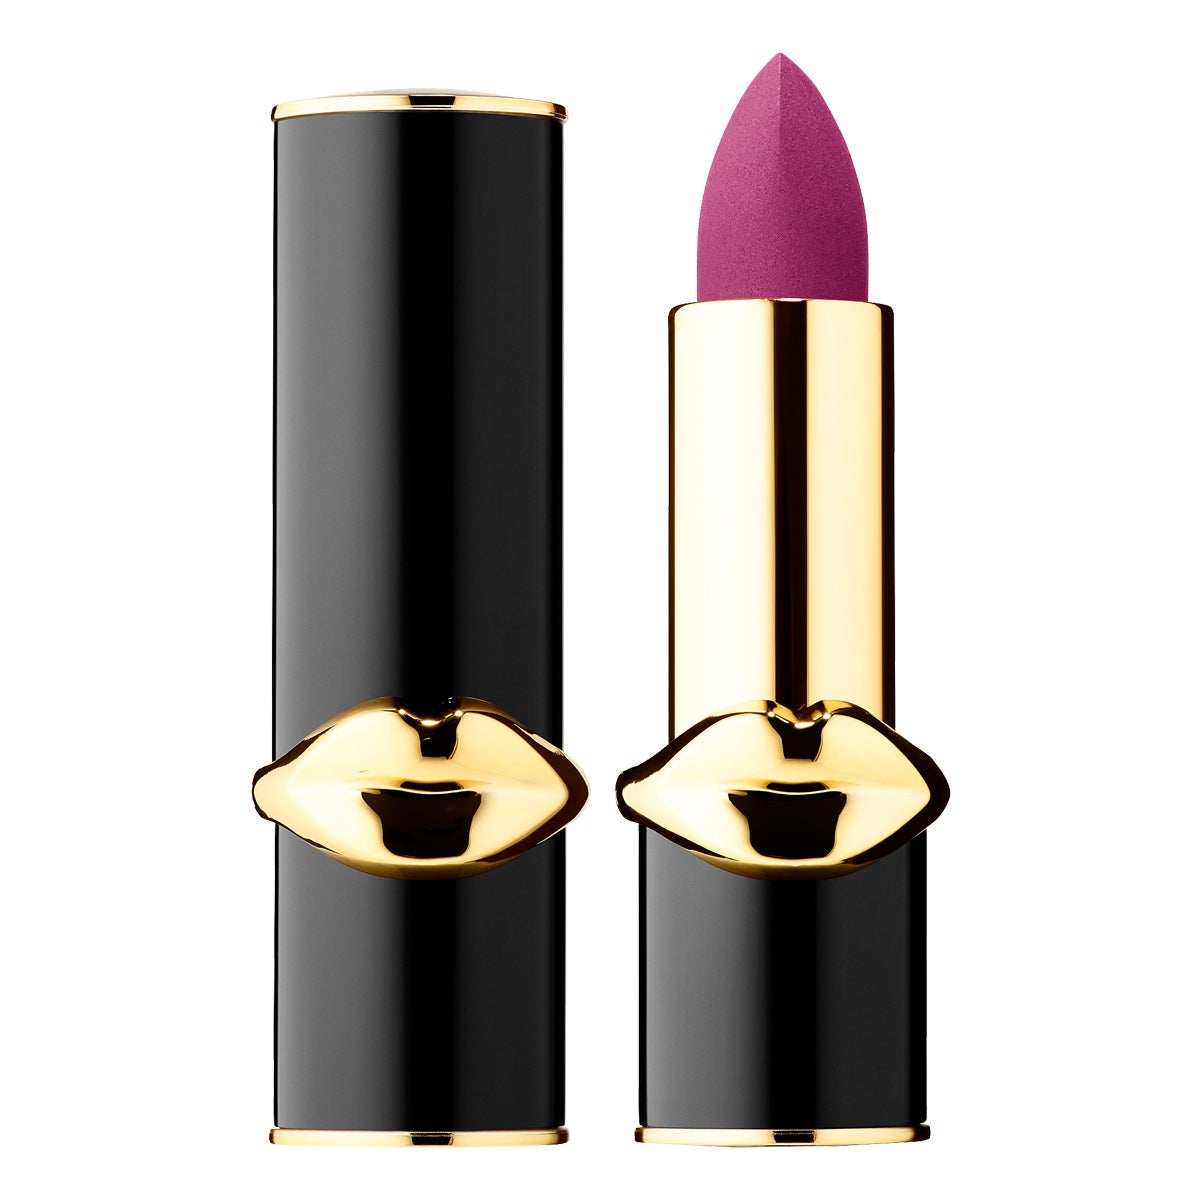 12 New Lipsticks You Need This Fall
